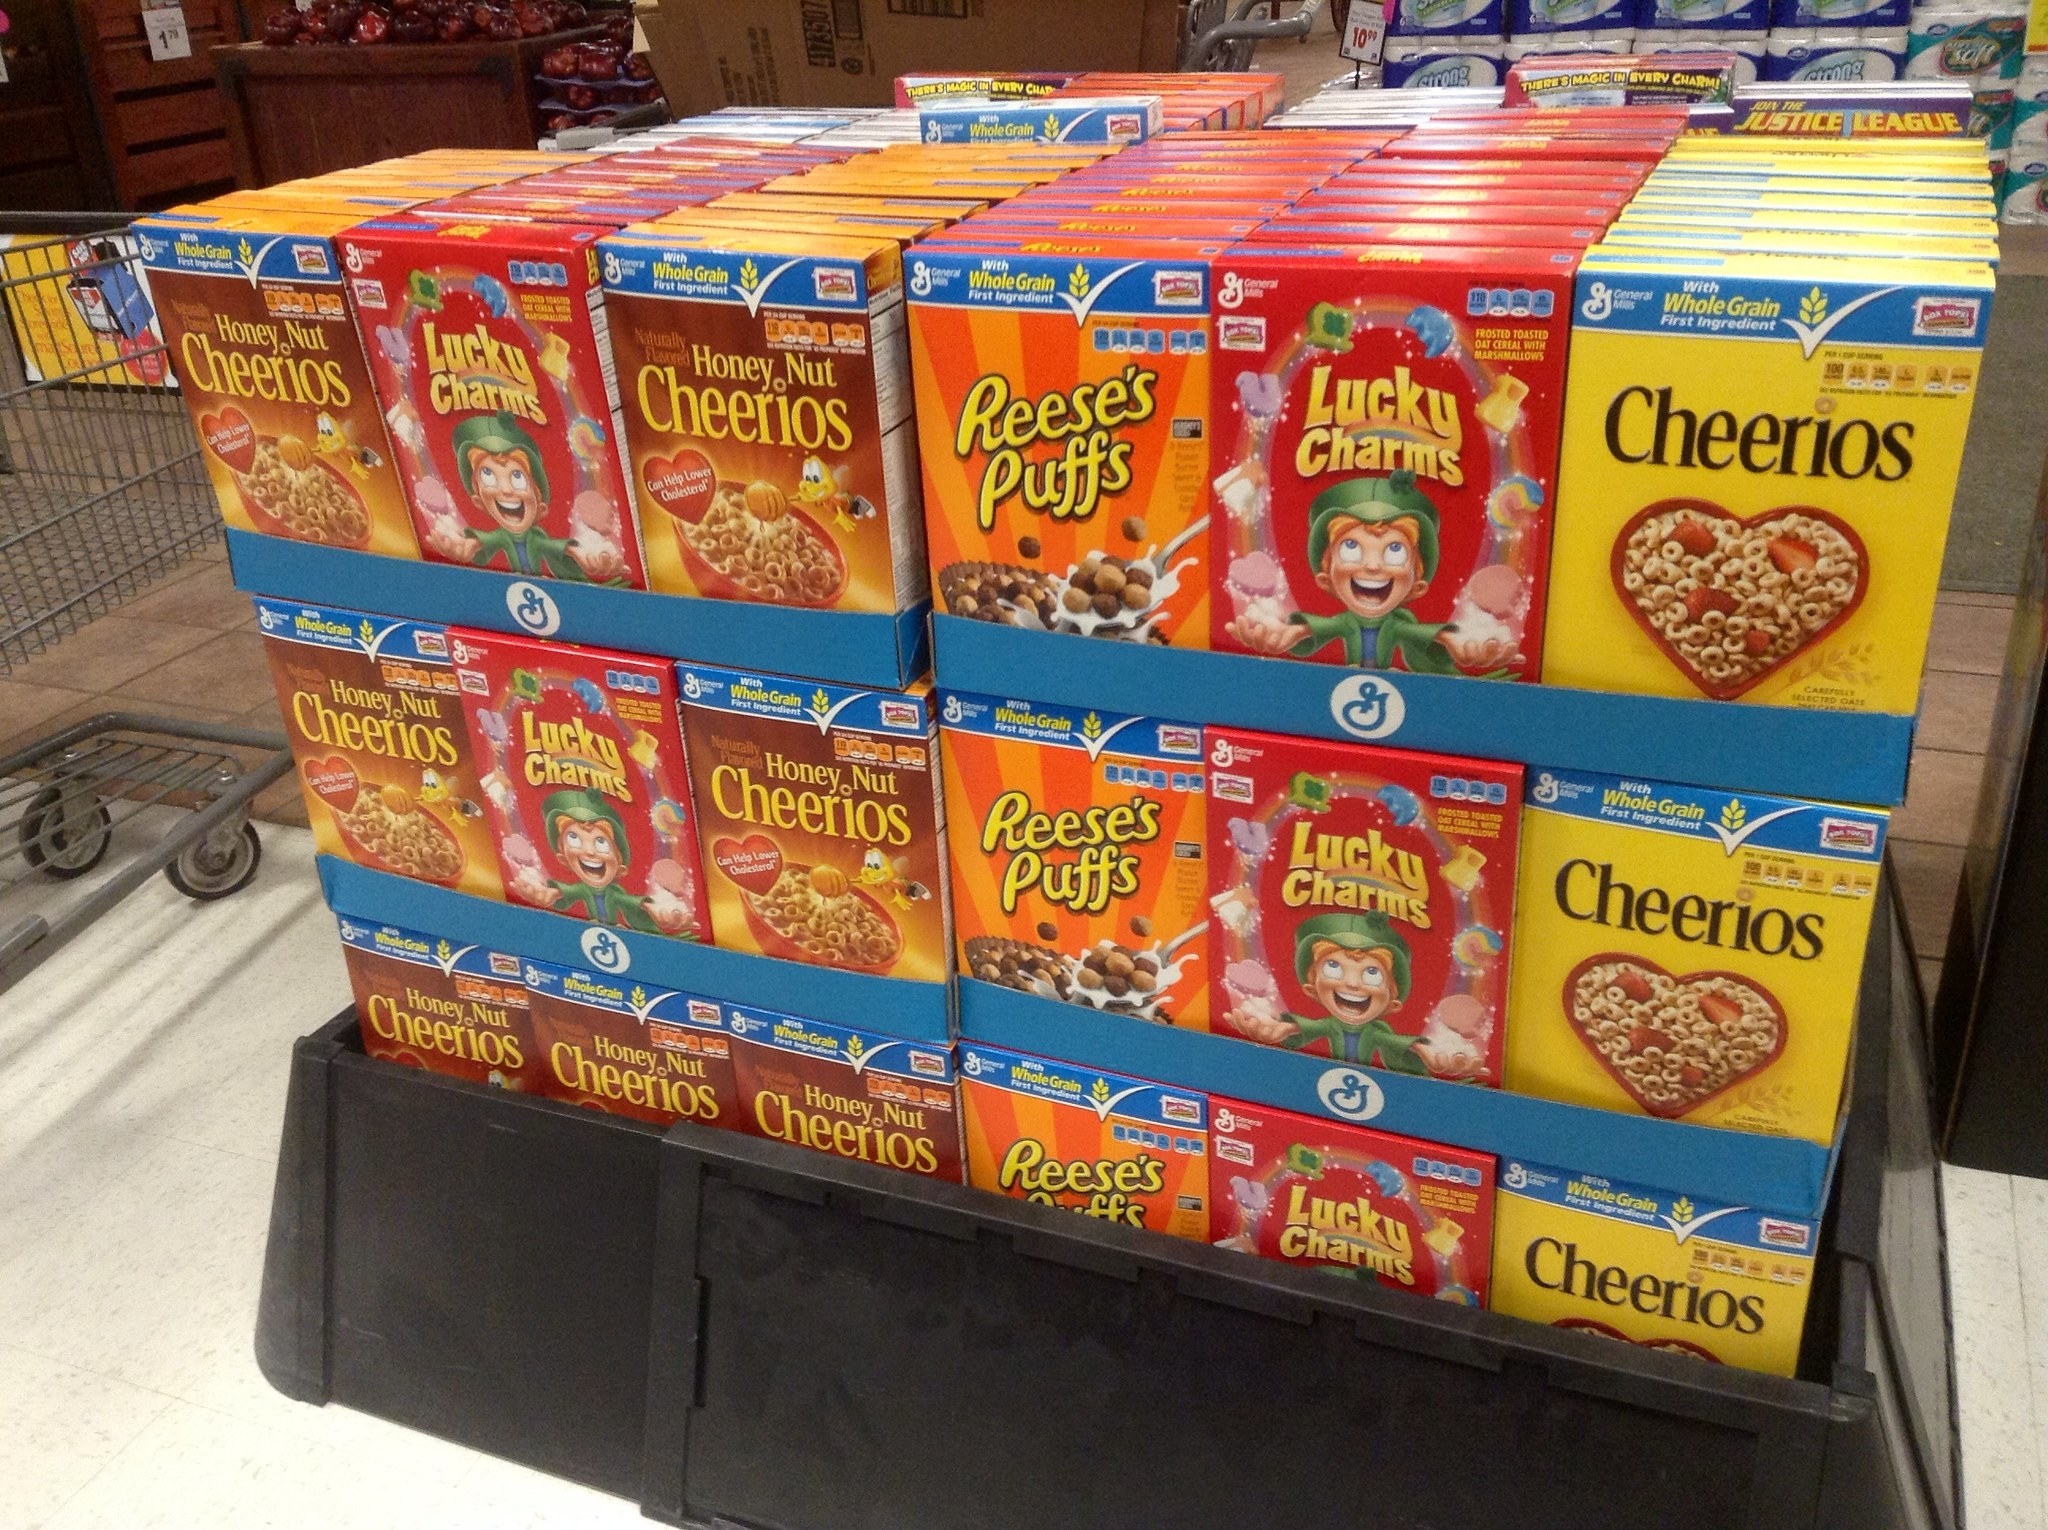 A pallet of American breakfast cereals including honey nut cheerios, lucky charms, reese&#x27;s puffs and regular cheerios.